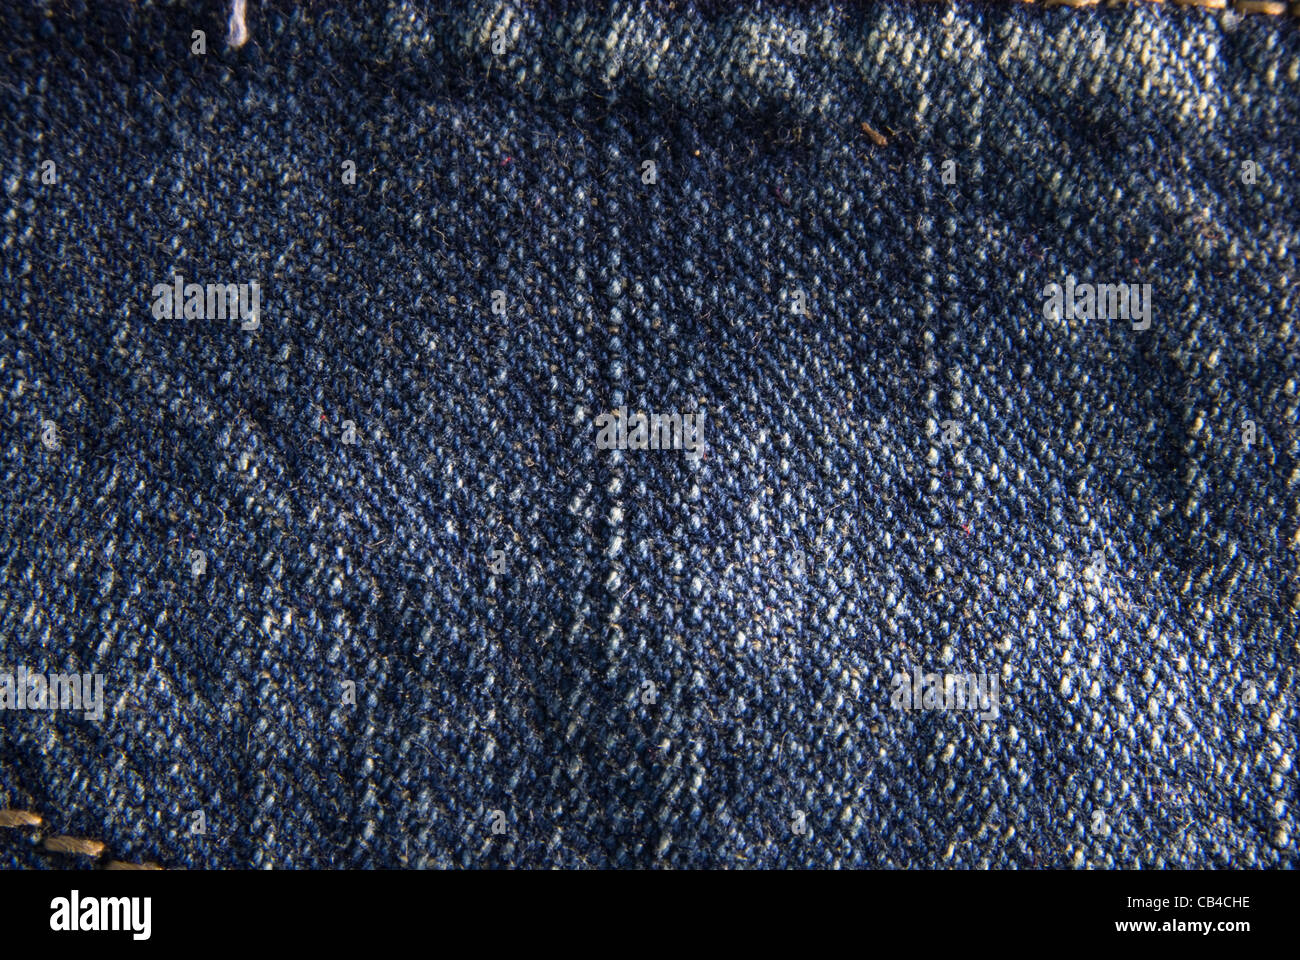 Blue denim jeans texture macro close up. Useful as background for design works. Stock Photo